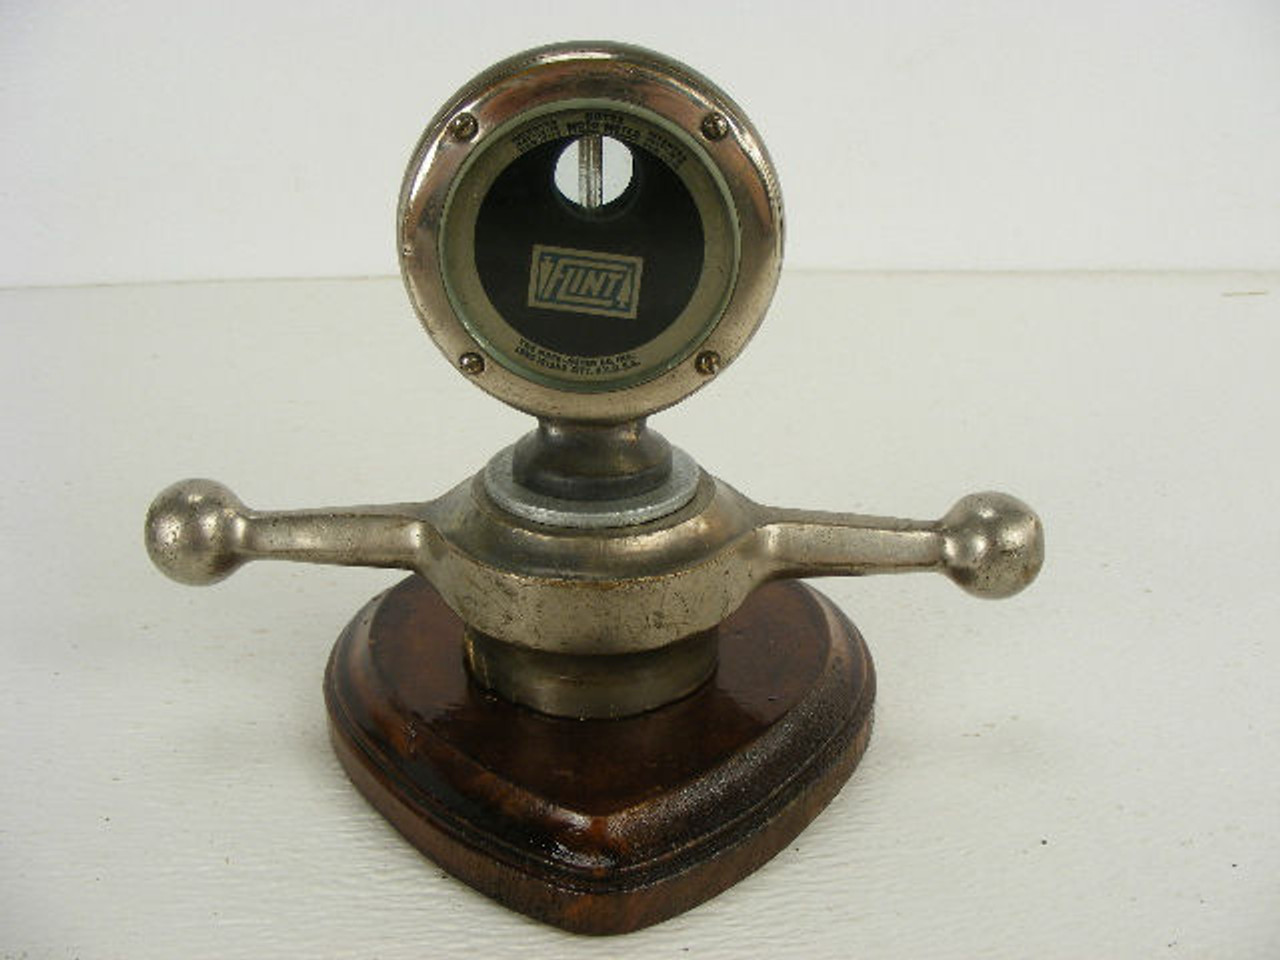 This is a rare antique Flint automobile radiator mascot temperature gauge  with dogbone from the 1920s and made by The Moto Meter Co. of Long 